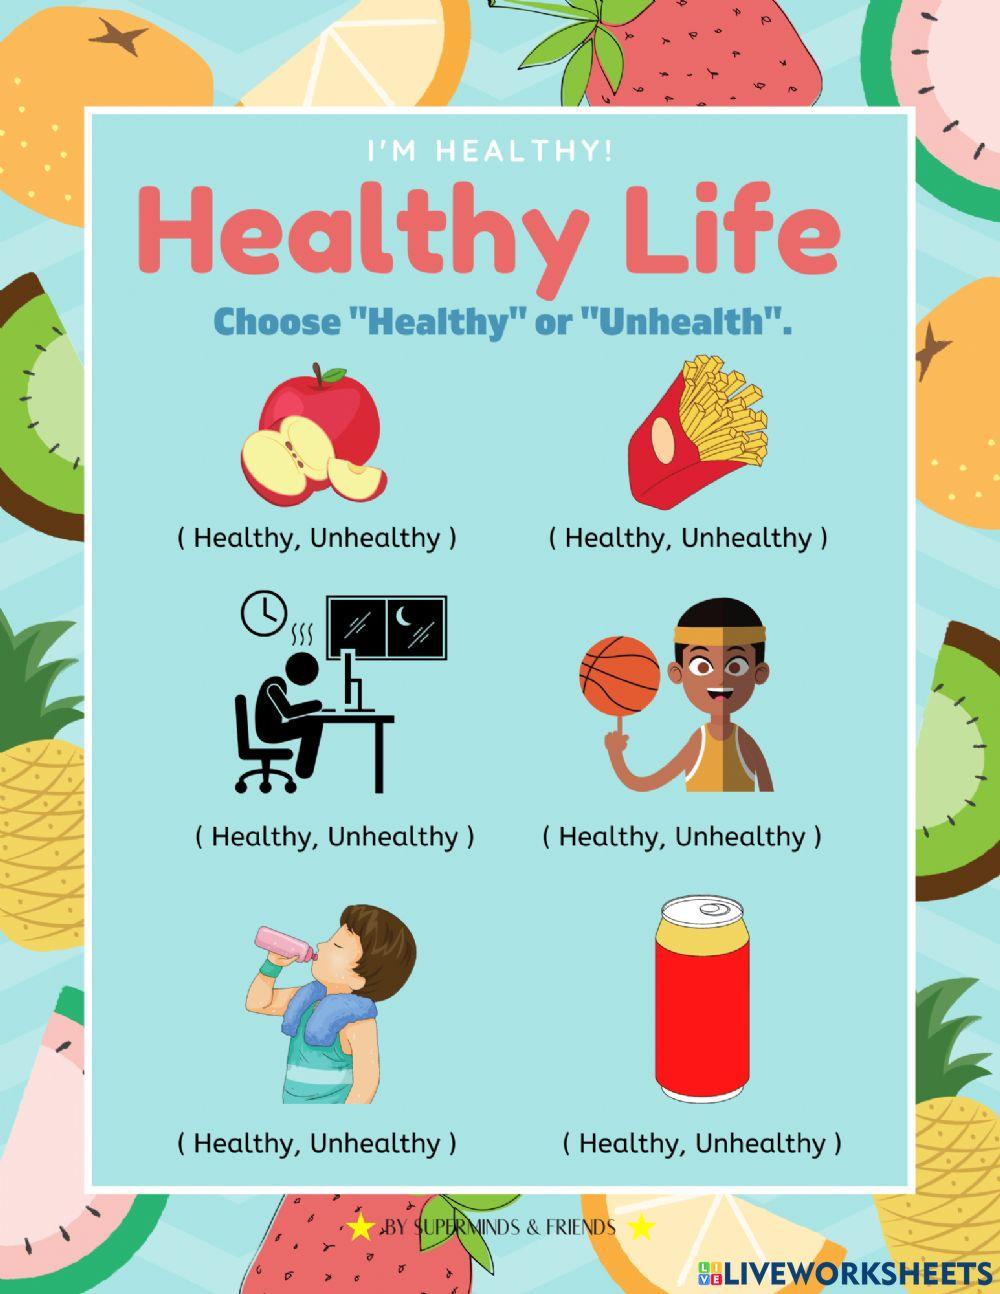 I'm Healthy! Healthy Life For Kids.